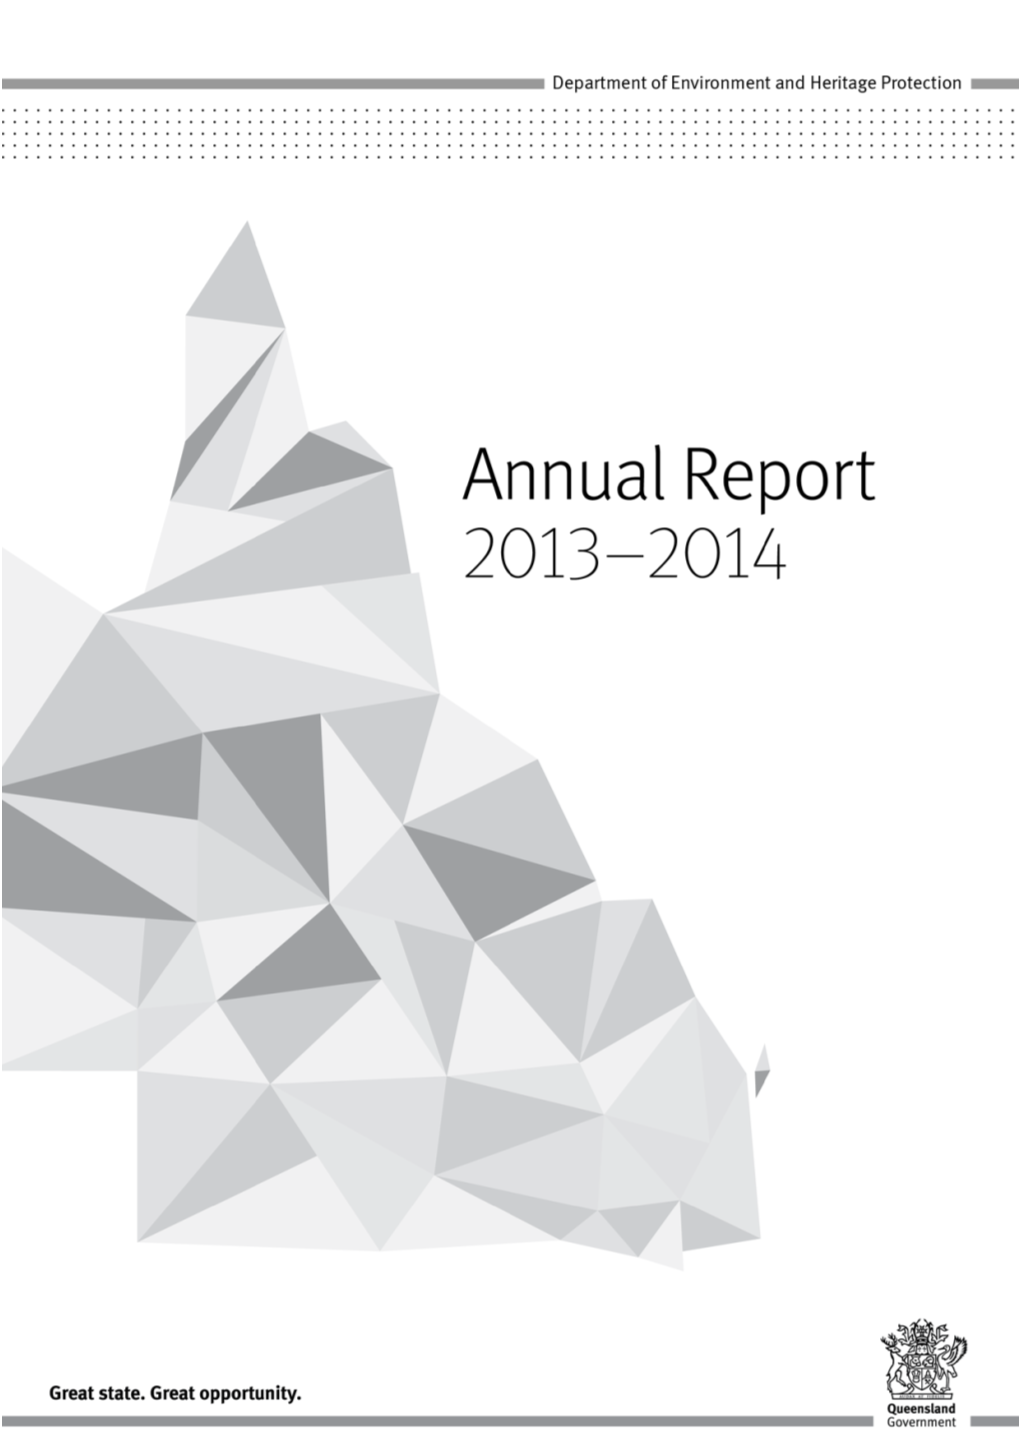 Department of Environment and Heritage Protection Annual Report